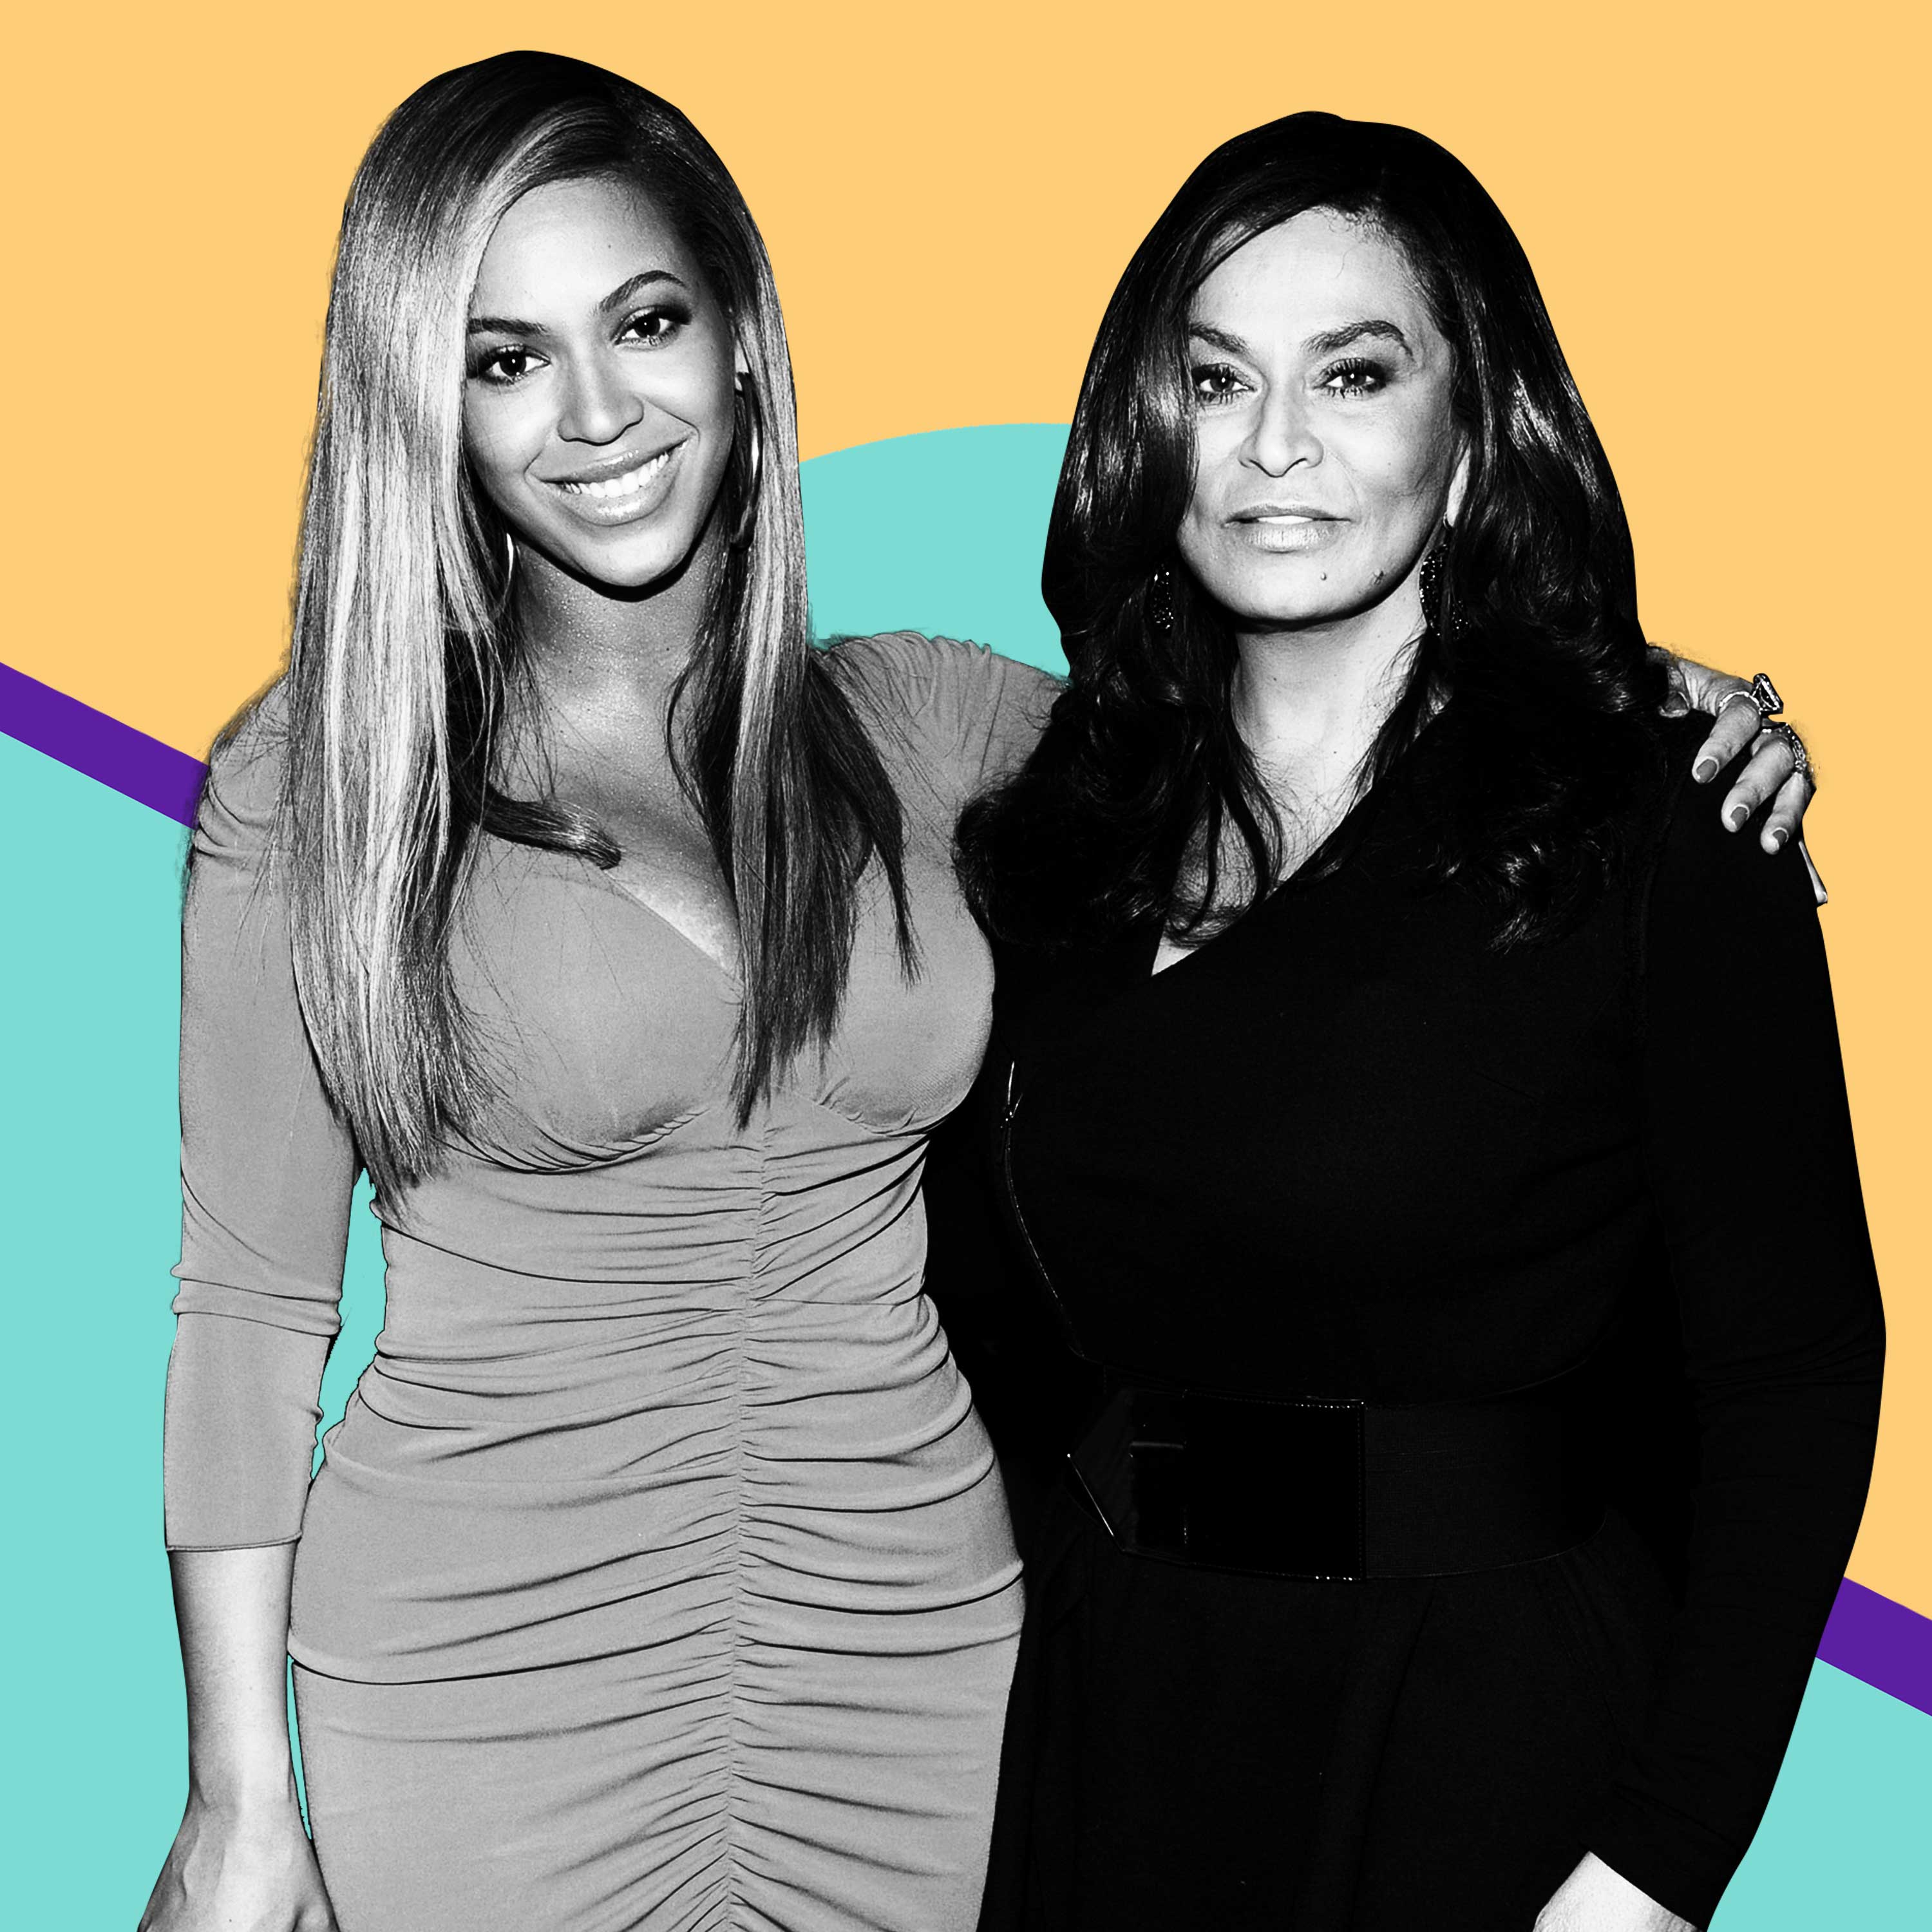 Tina Knowles, Beyonce and JAY-Z Are Every Black Family In This Electric Slide Video
